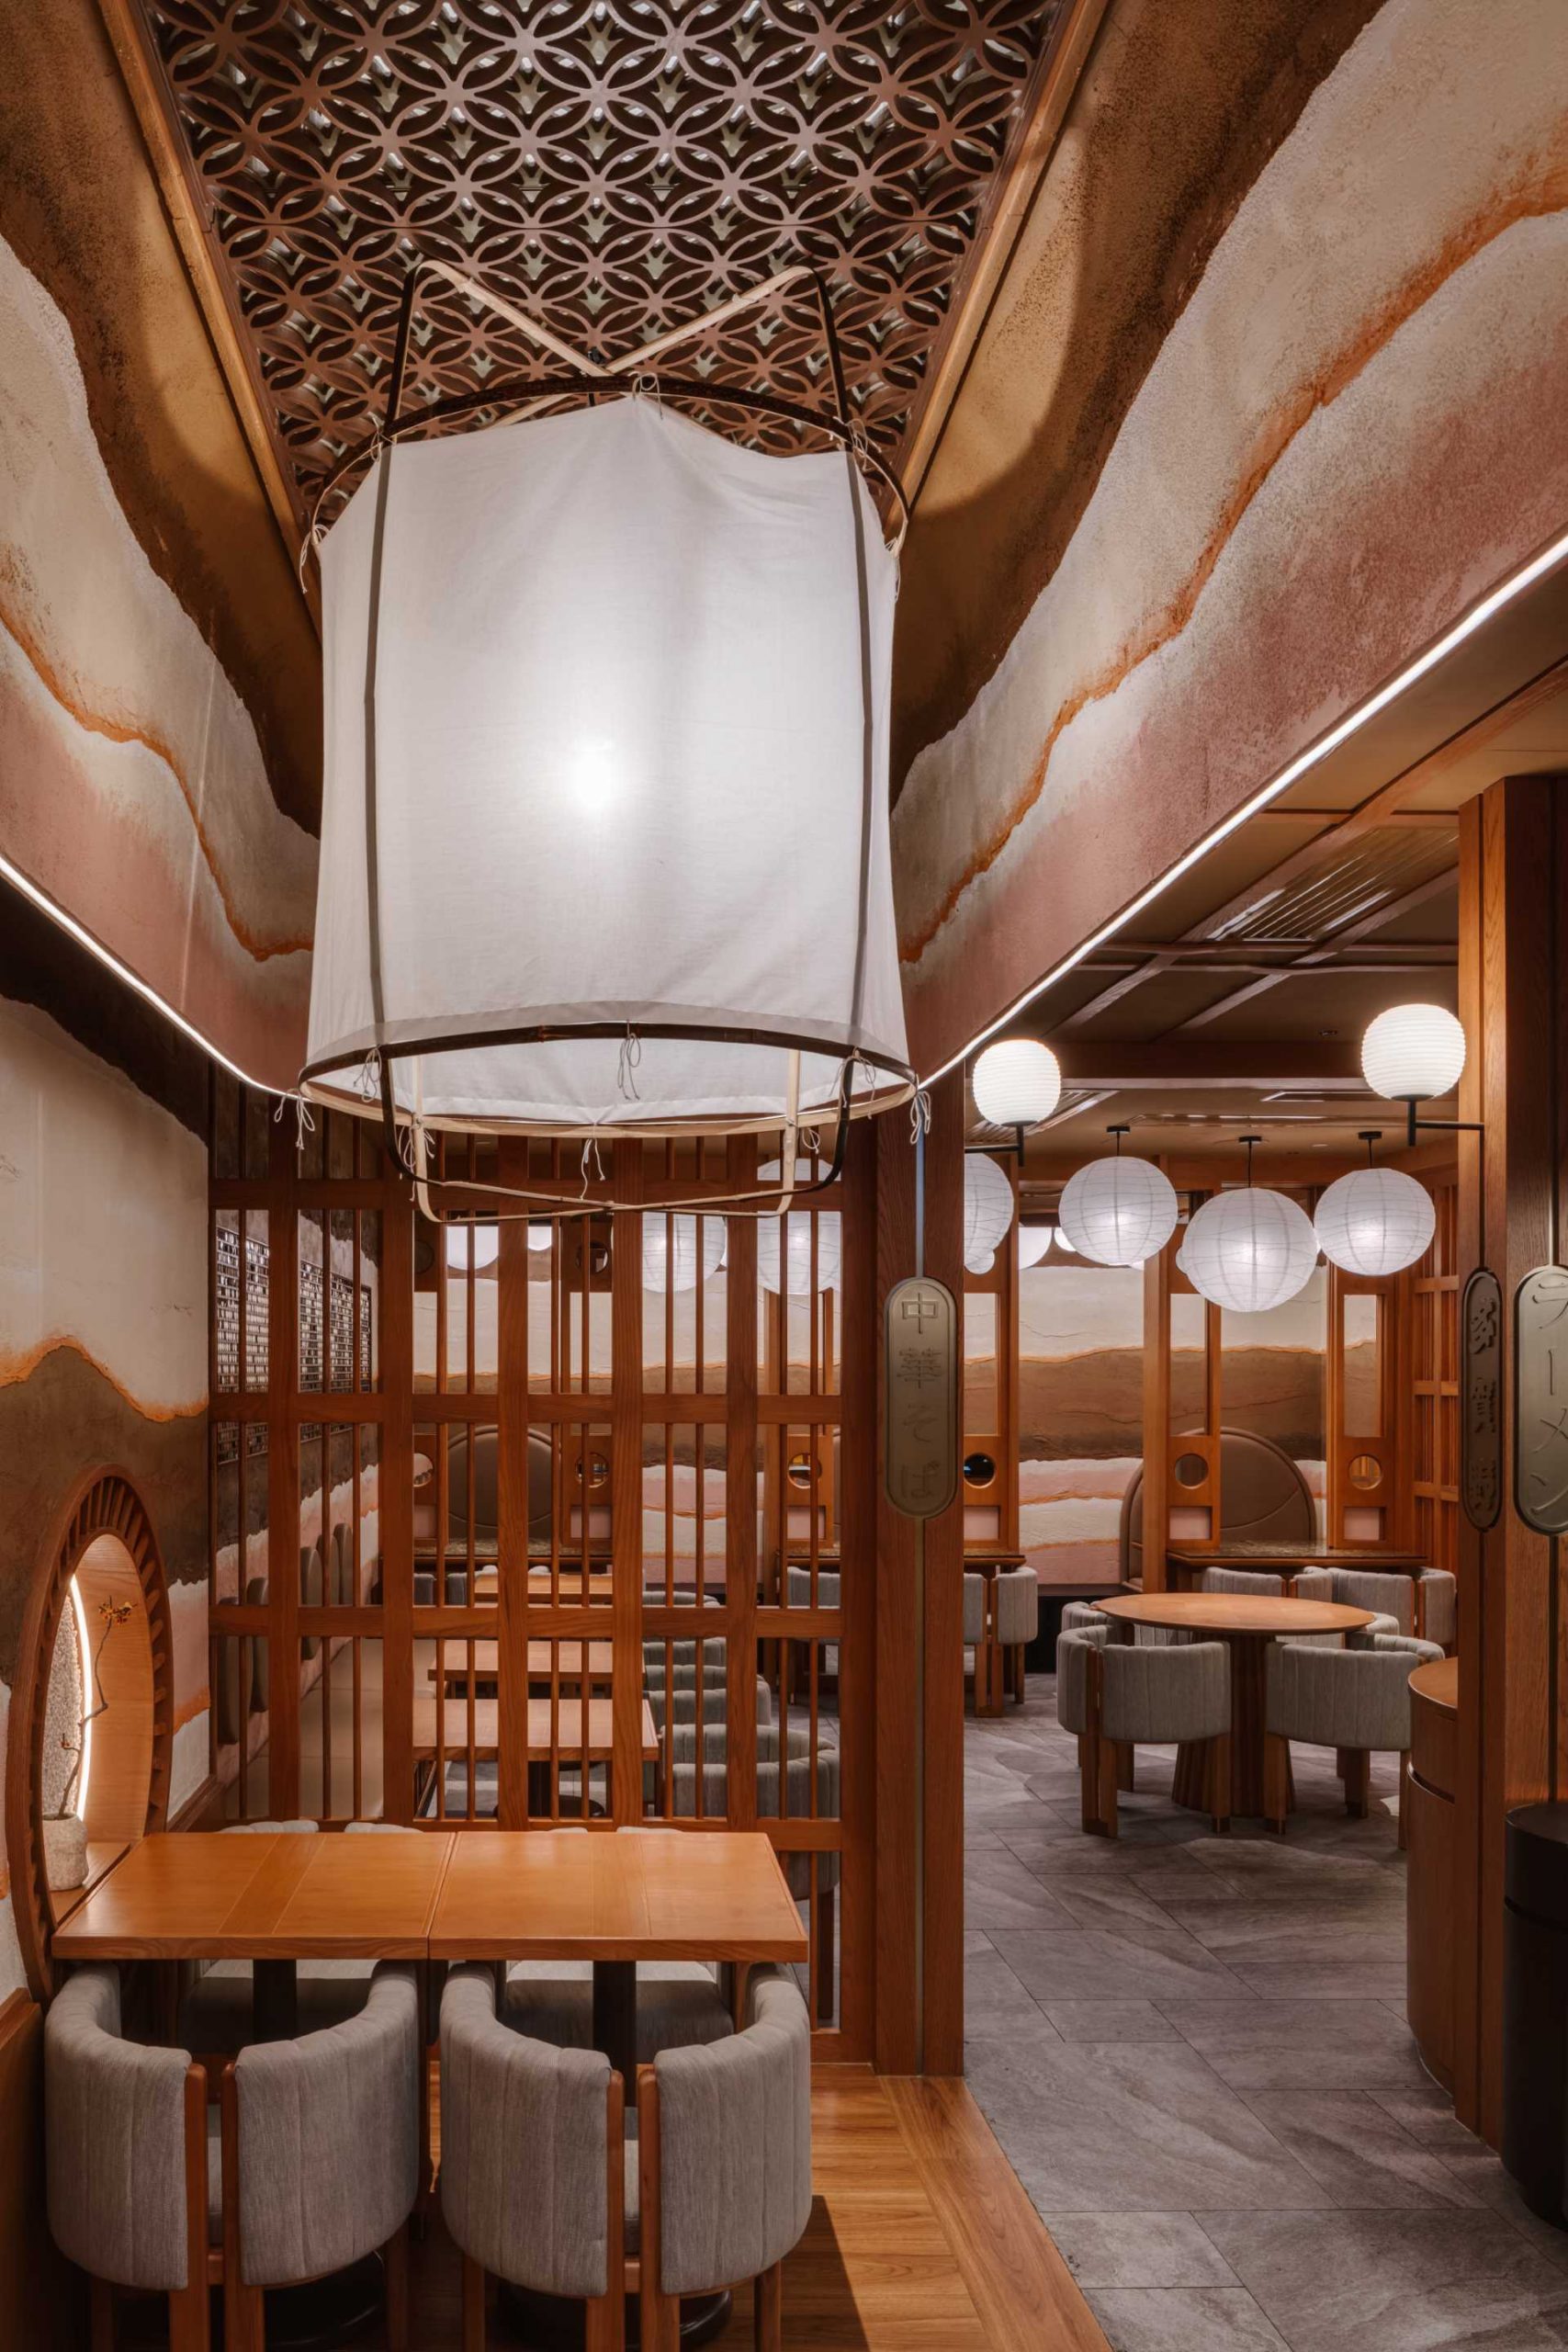 Above some of the tables in this modern restaurant are natural pendant lights made of bamboo and paper by Ay illuminate. Various sizes of Noguchi sphere lanterns are also present in the interior.